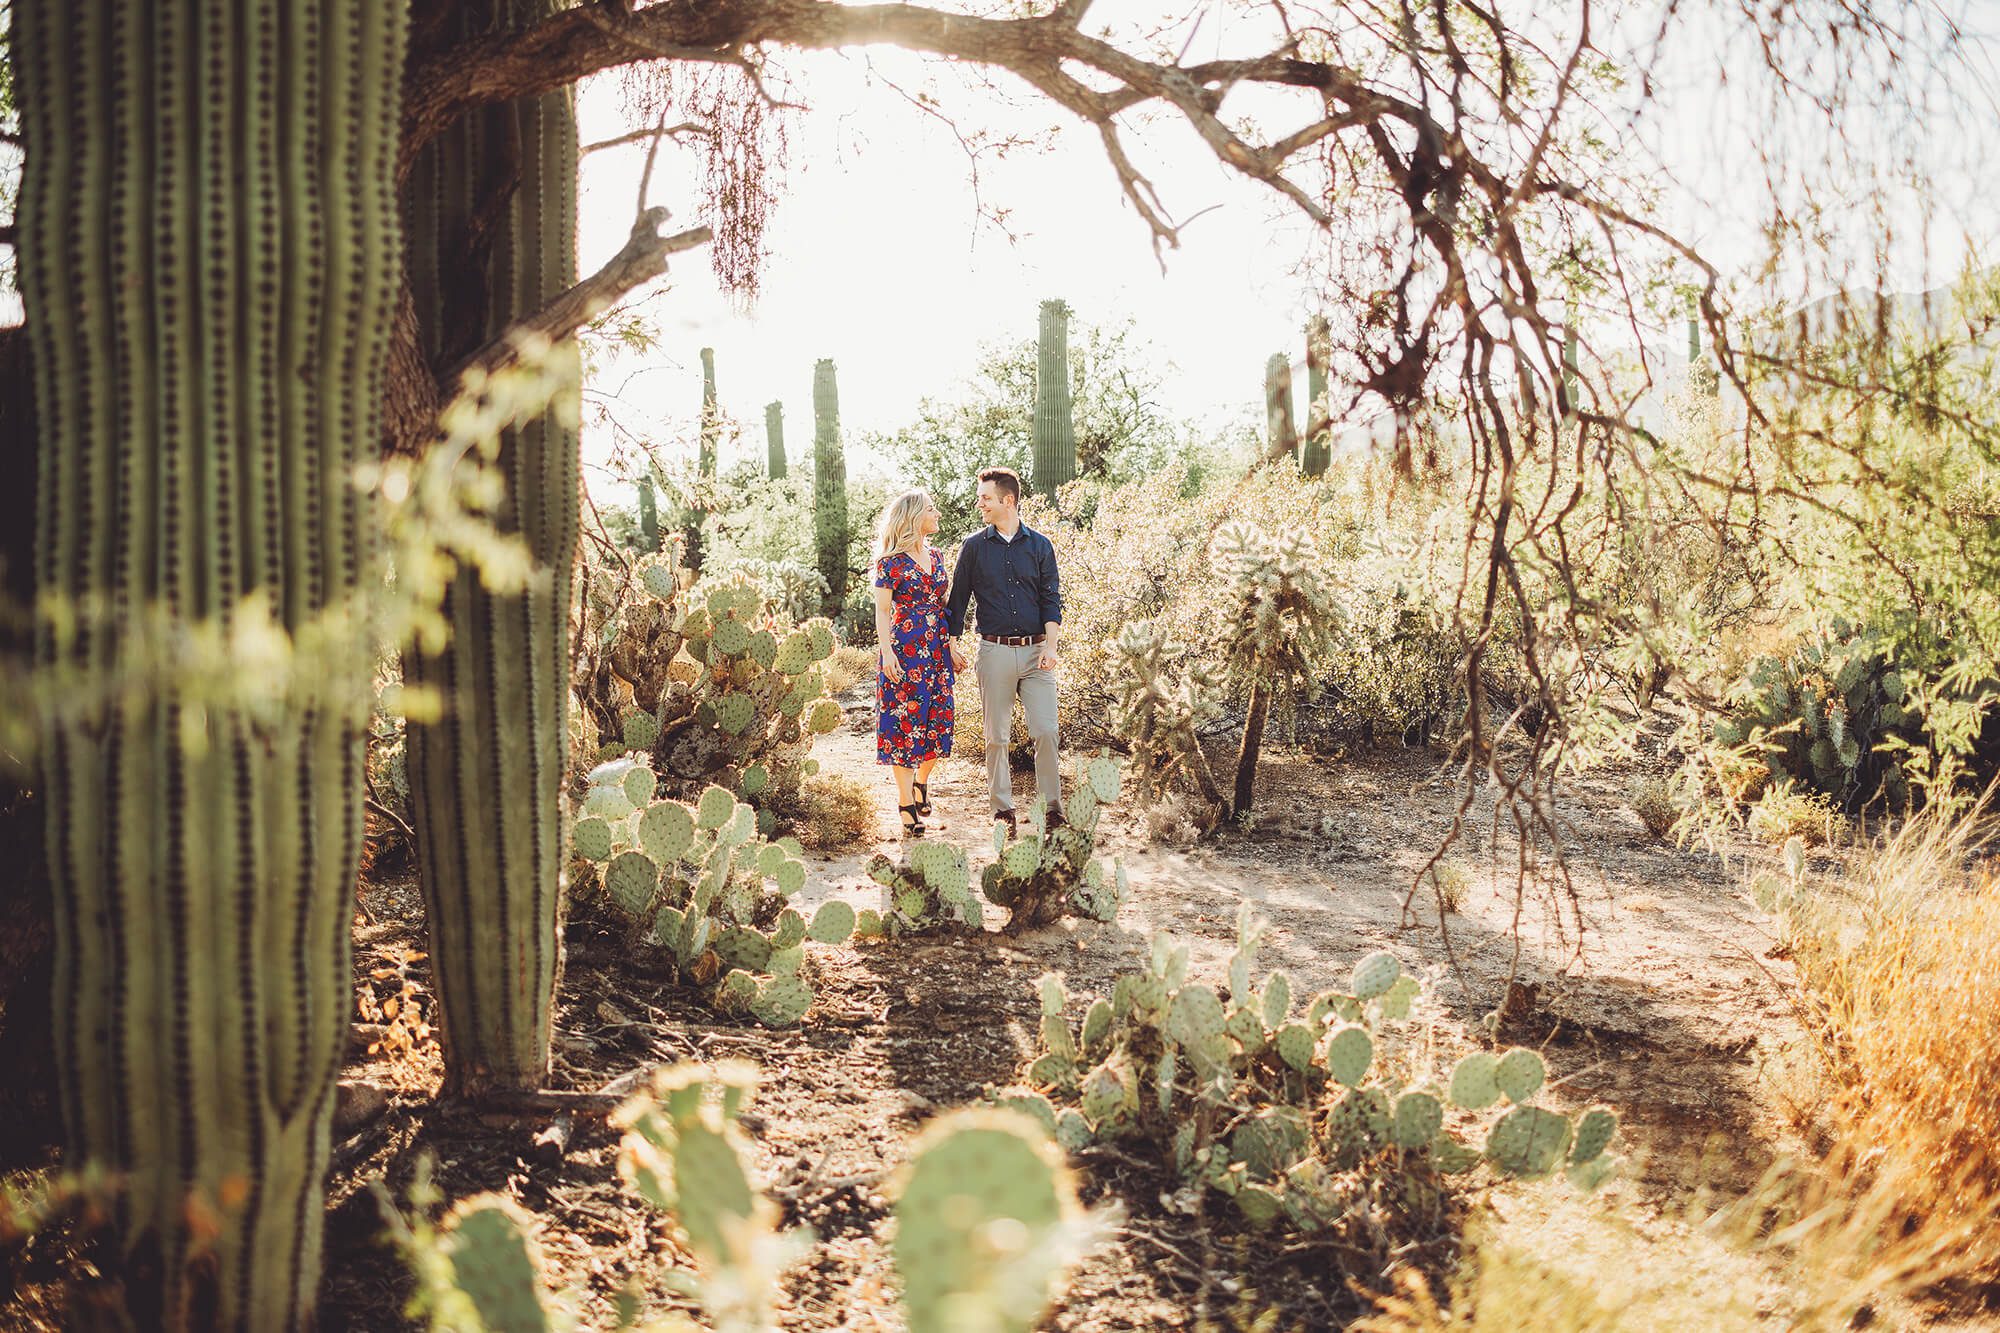 A sweet stroll for Shaun and Ally at Sabino Canyon during their couple's session